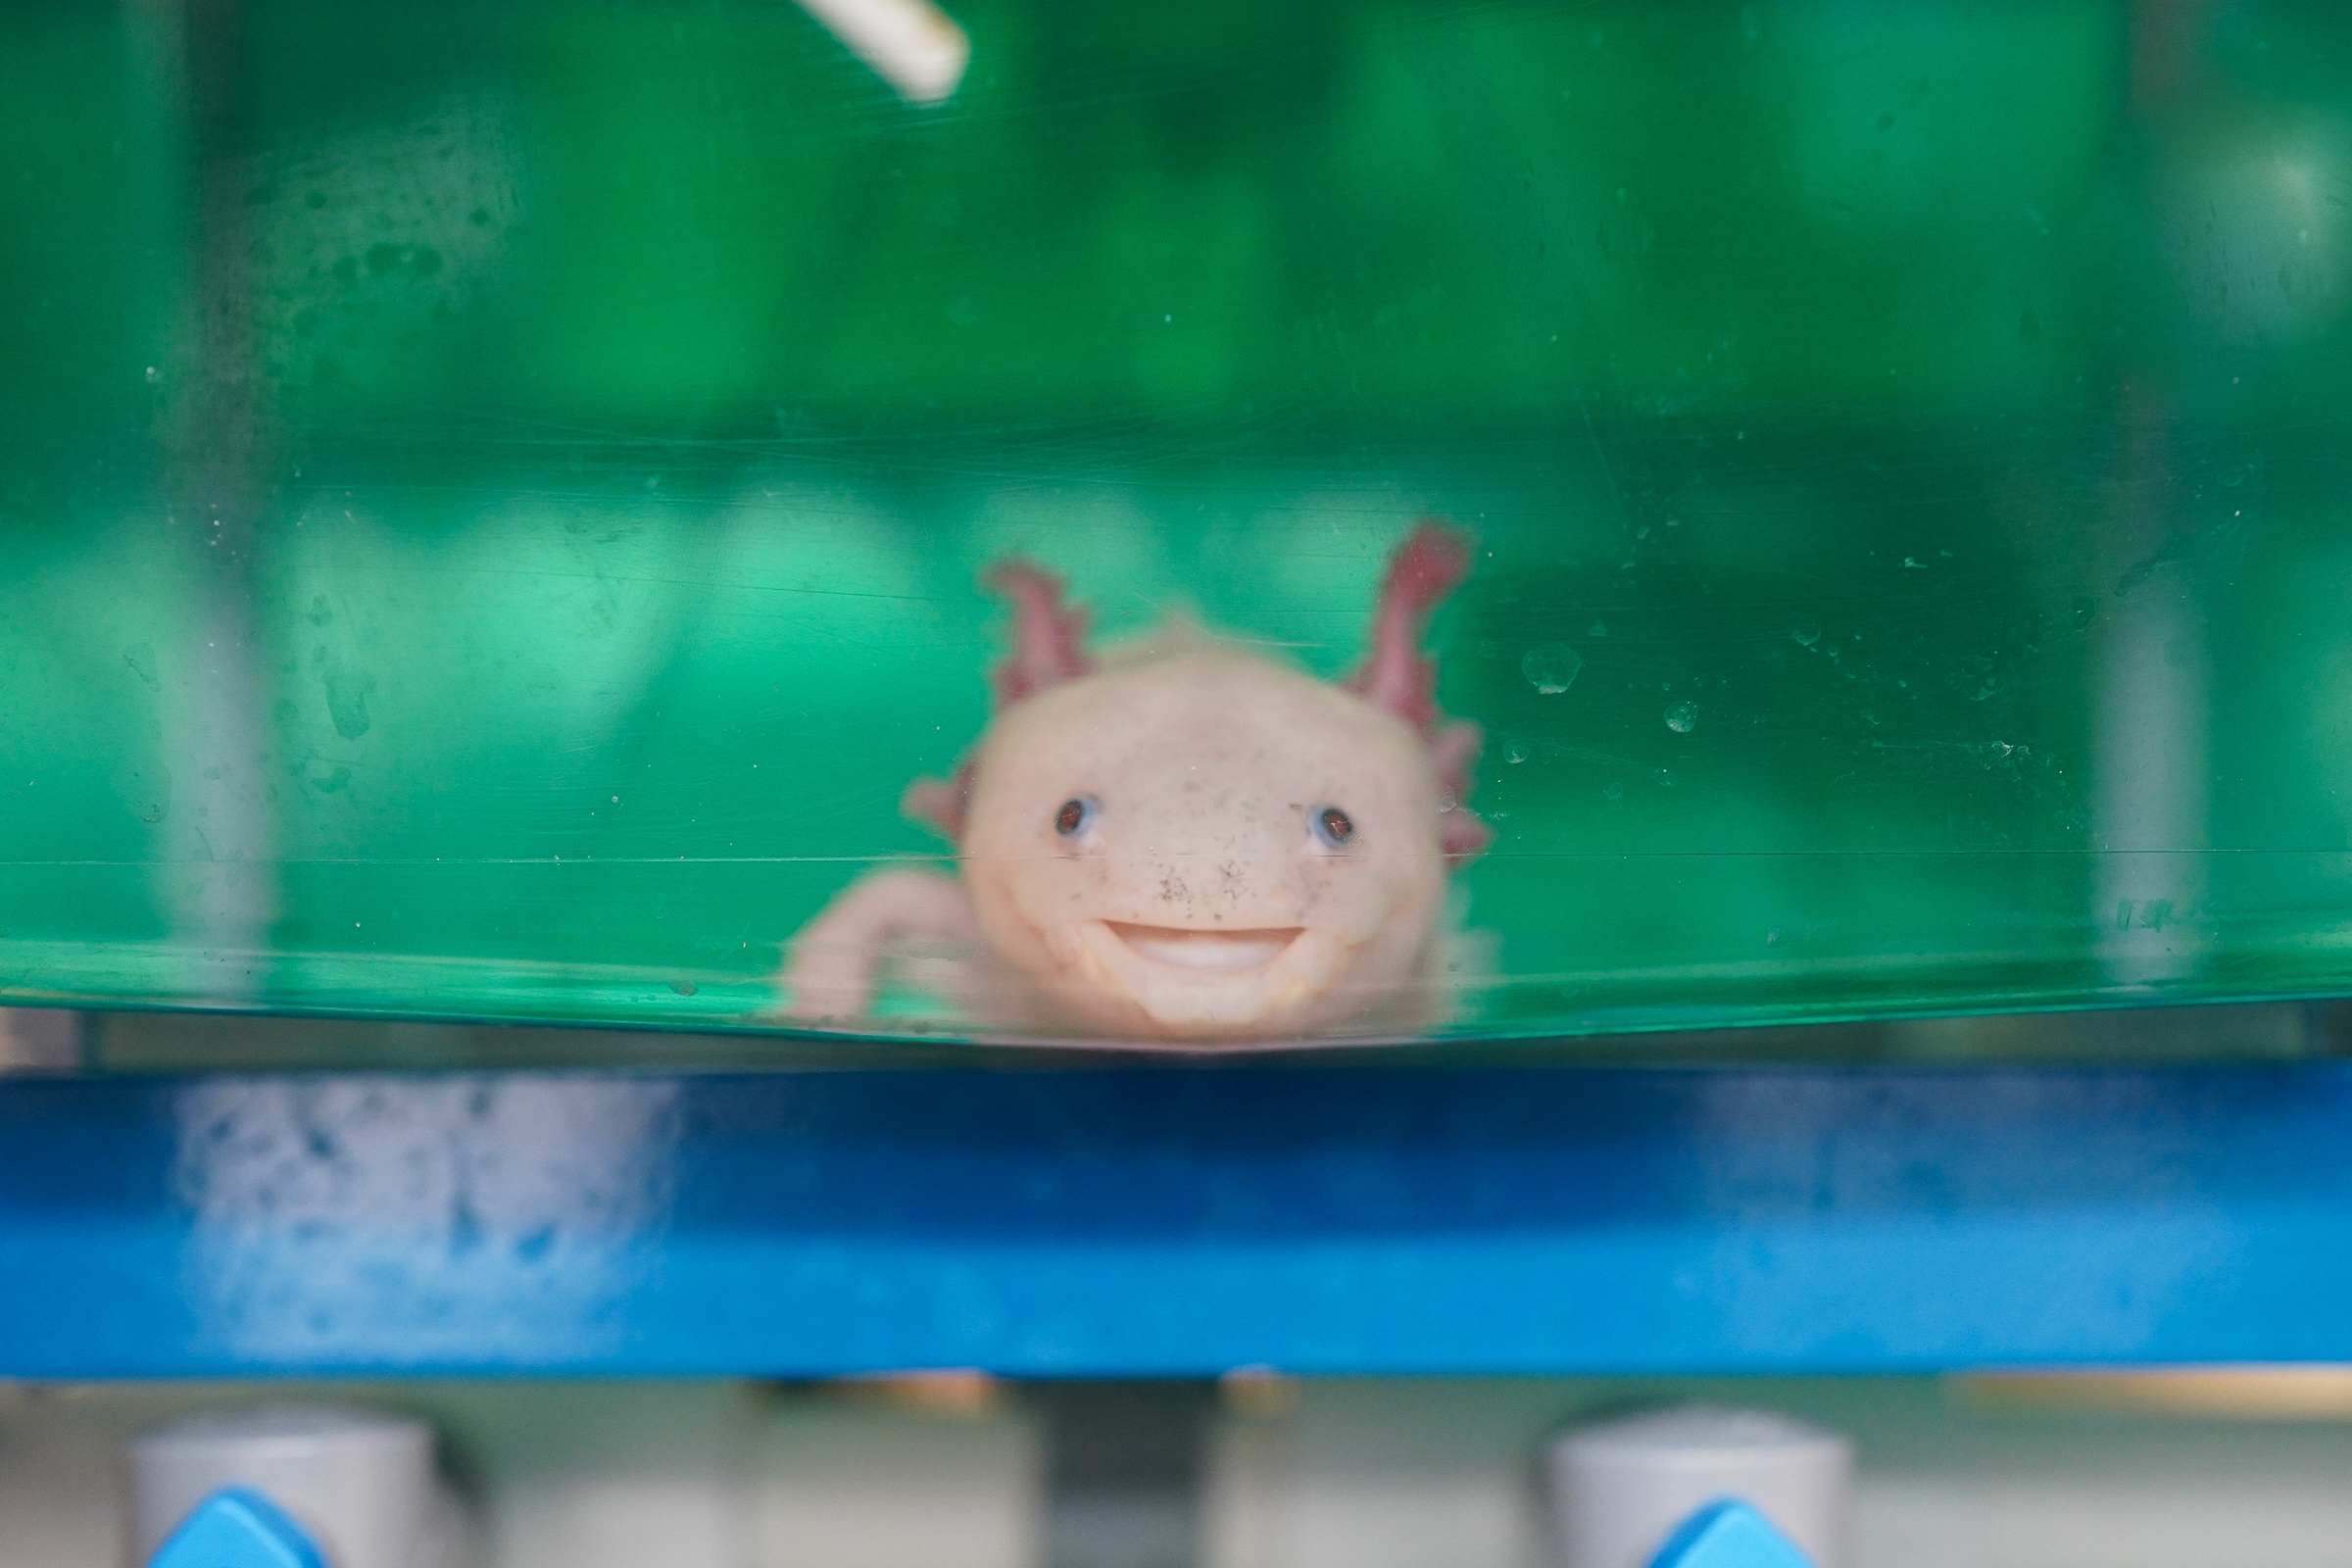 An Axolotl appears to smile at the camera. Credit: Christian Seldon